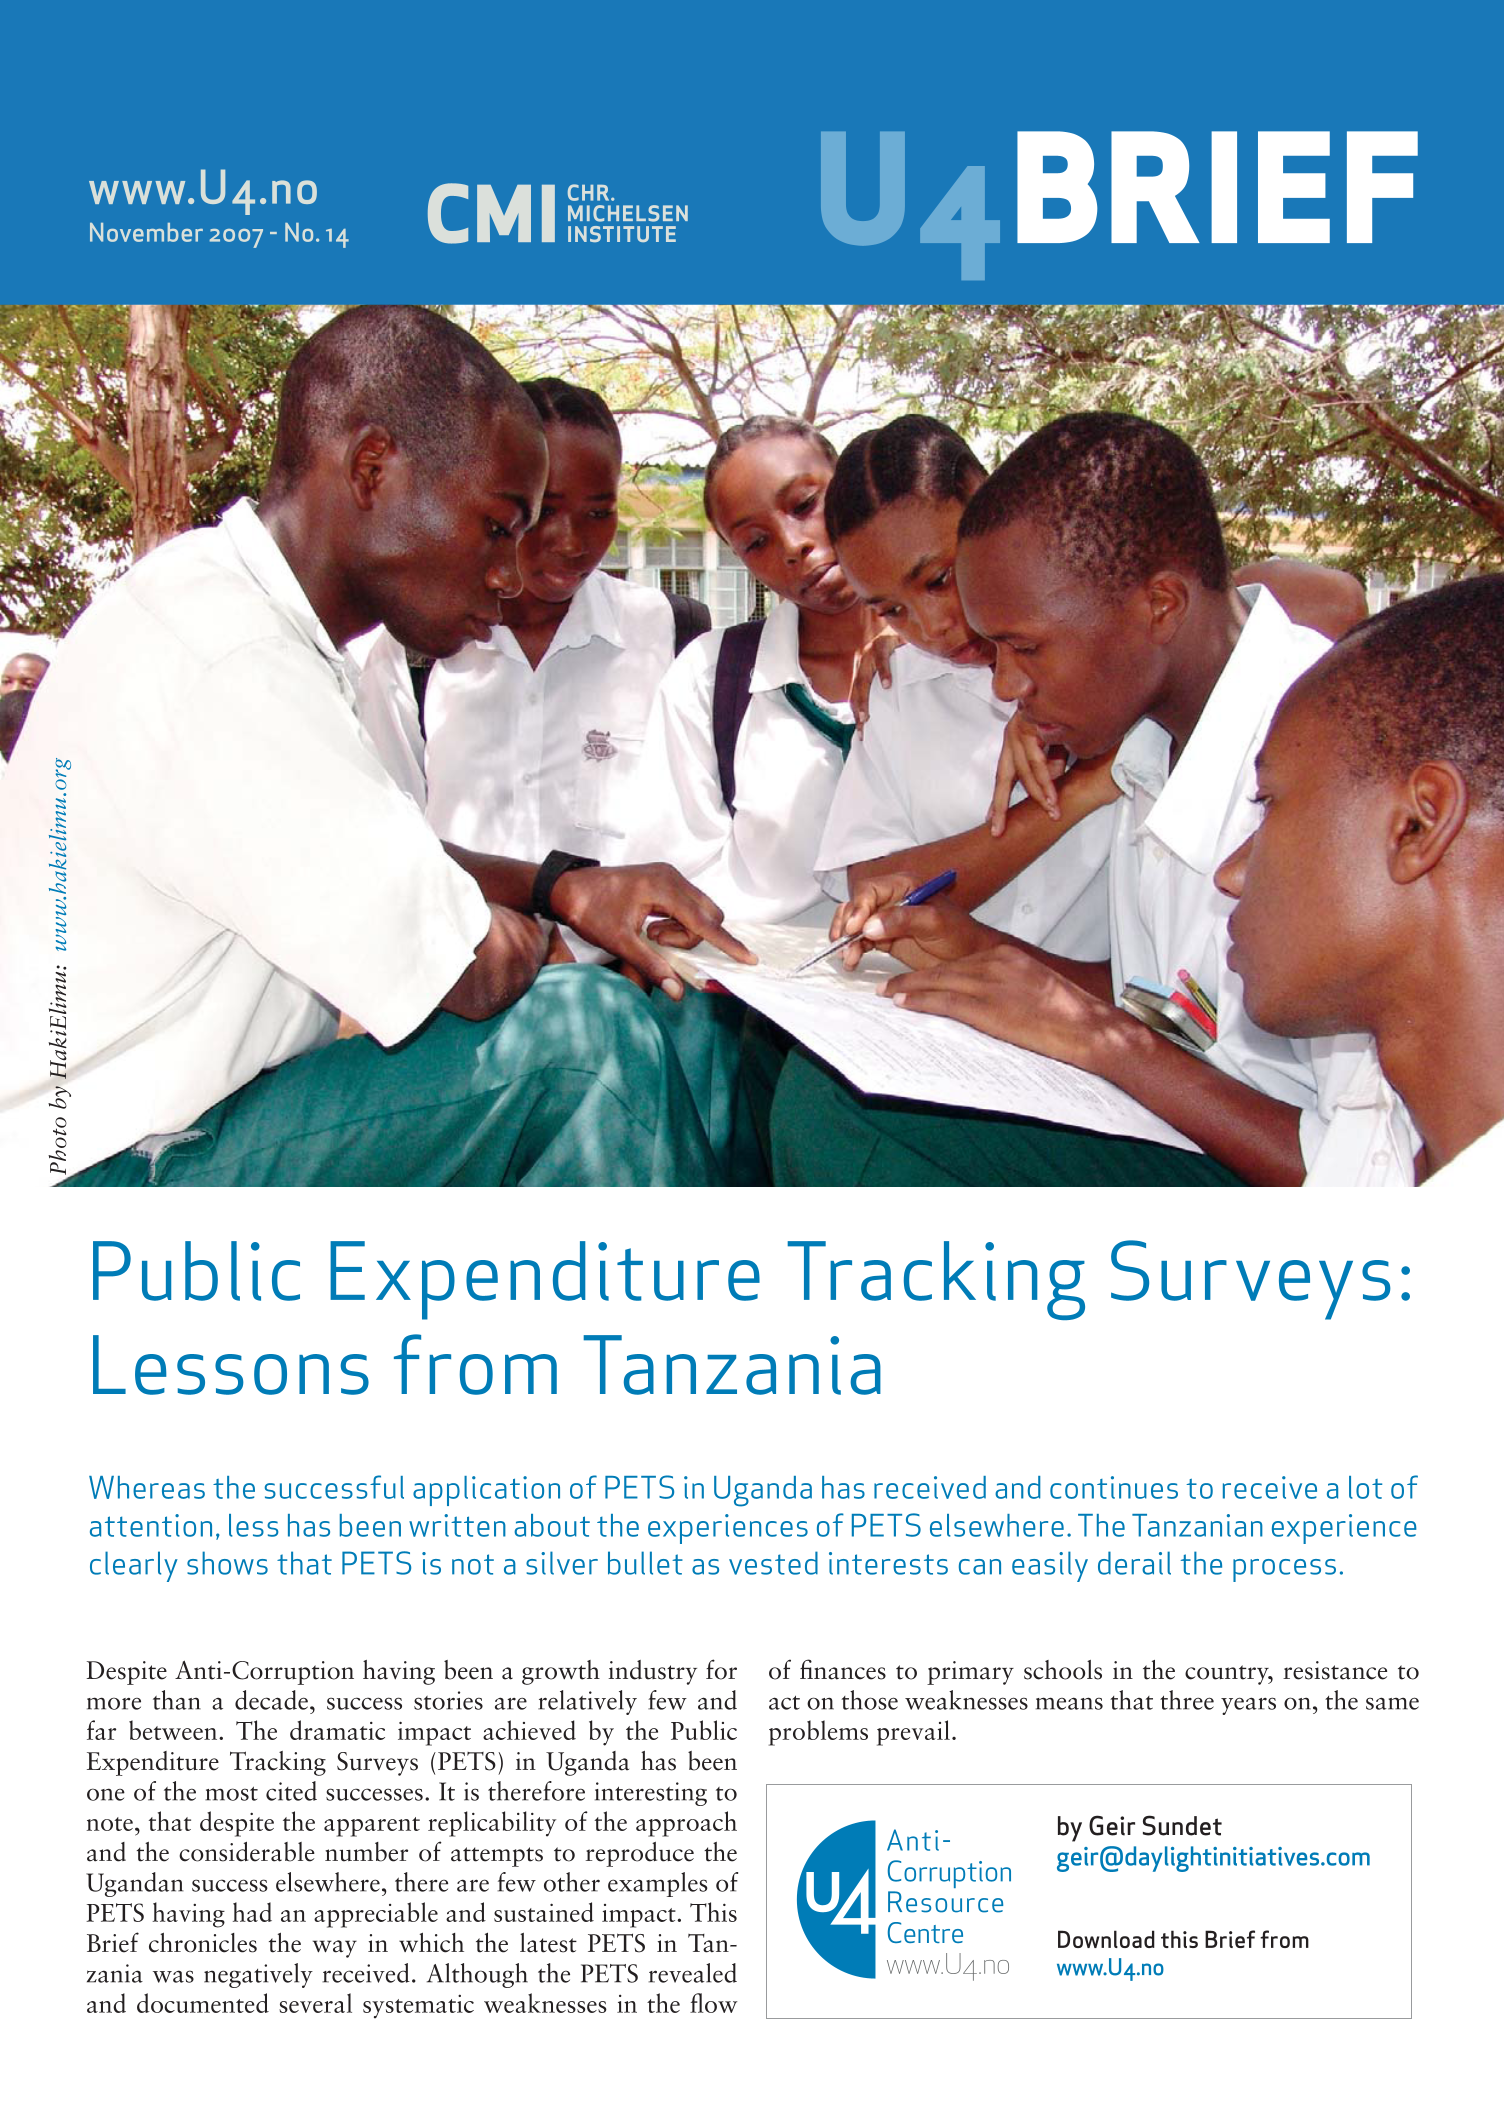 Public expenditure tracking surveys: Lessons from Tanzania